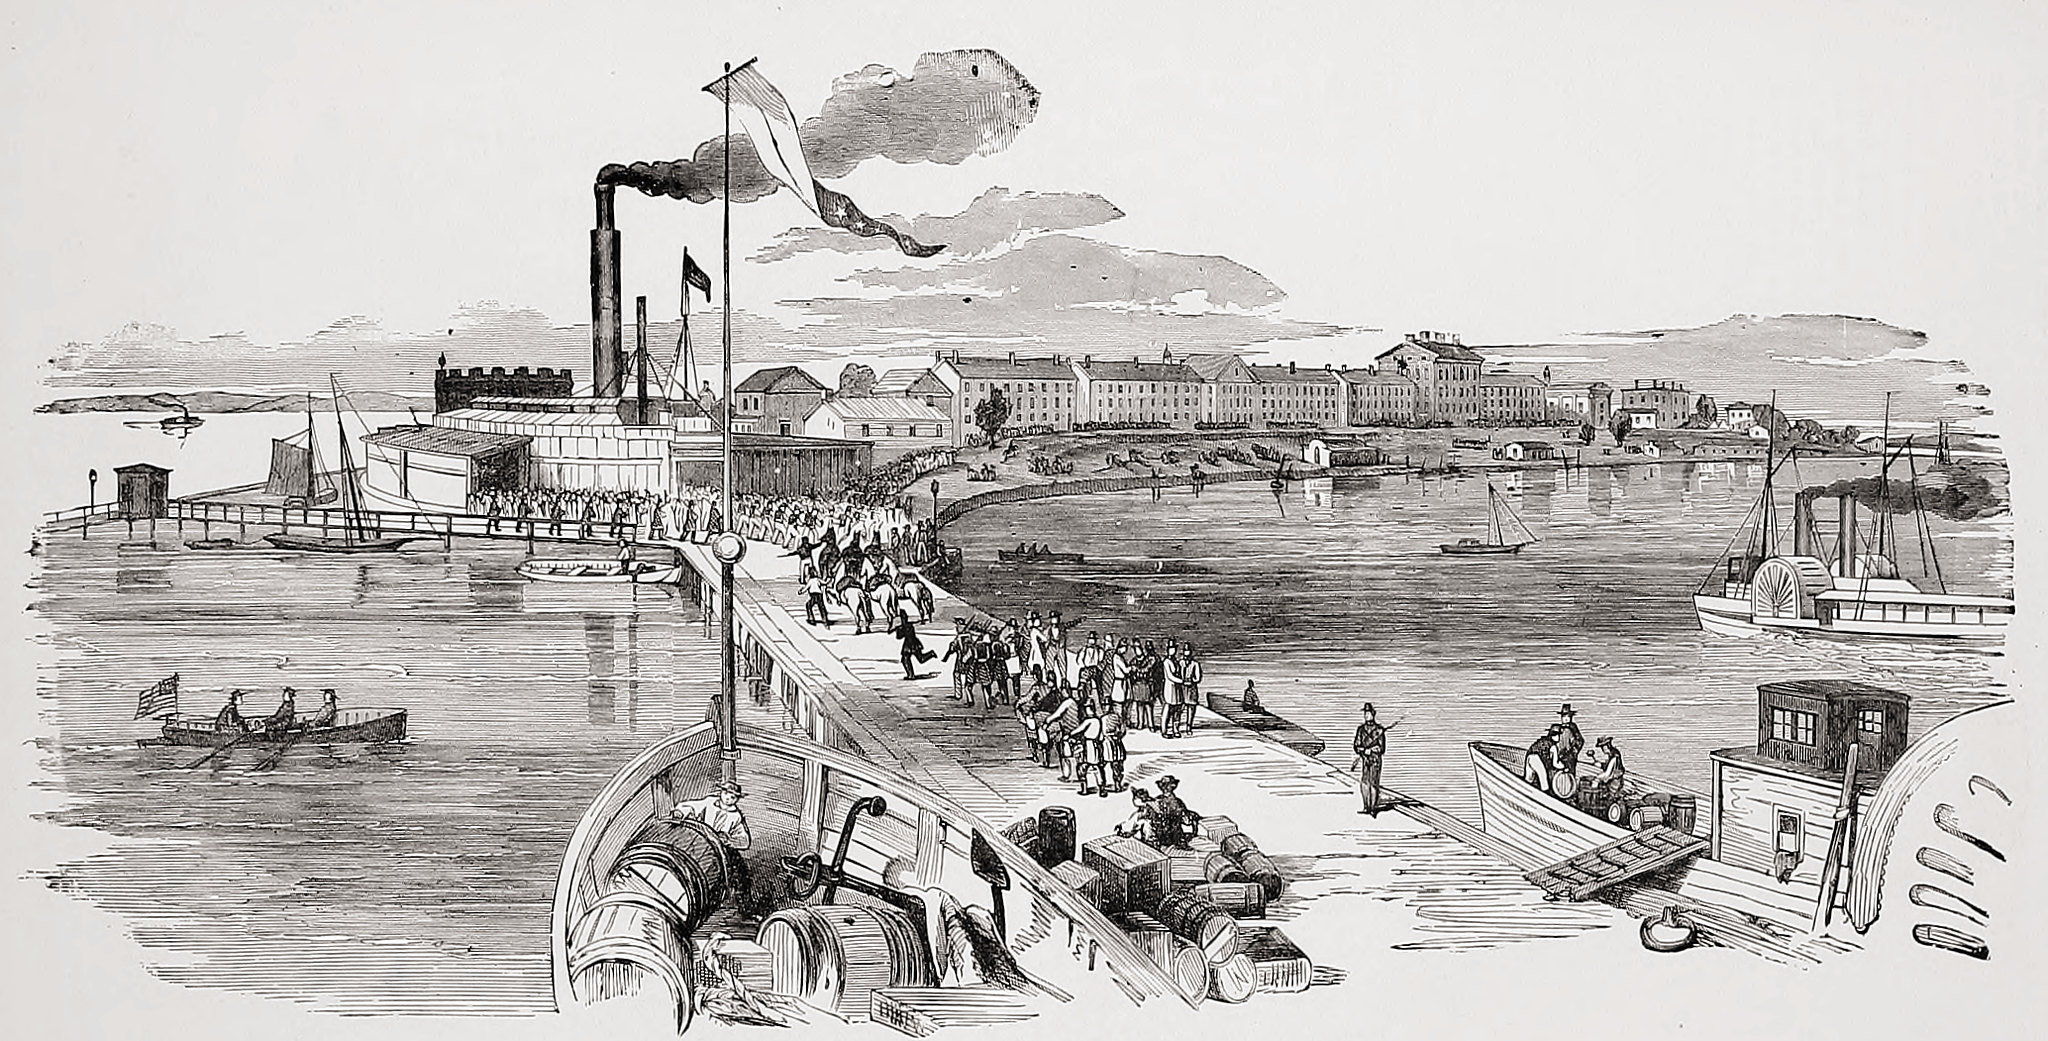 Landing of Troops at the Wharf of the Naval Acadamy, Annapolis, Md.